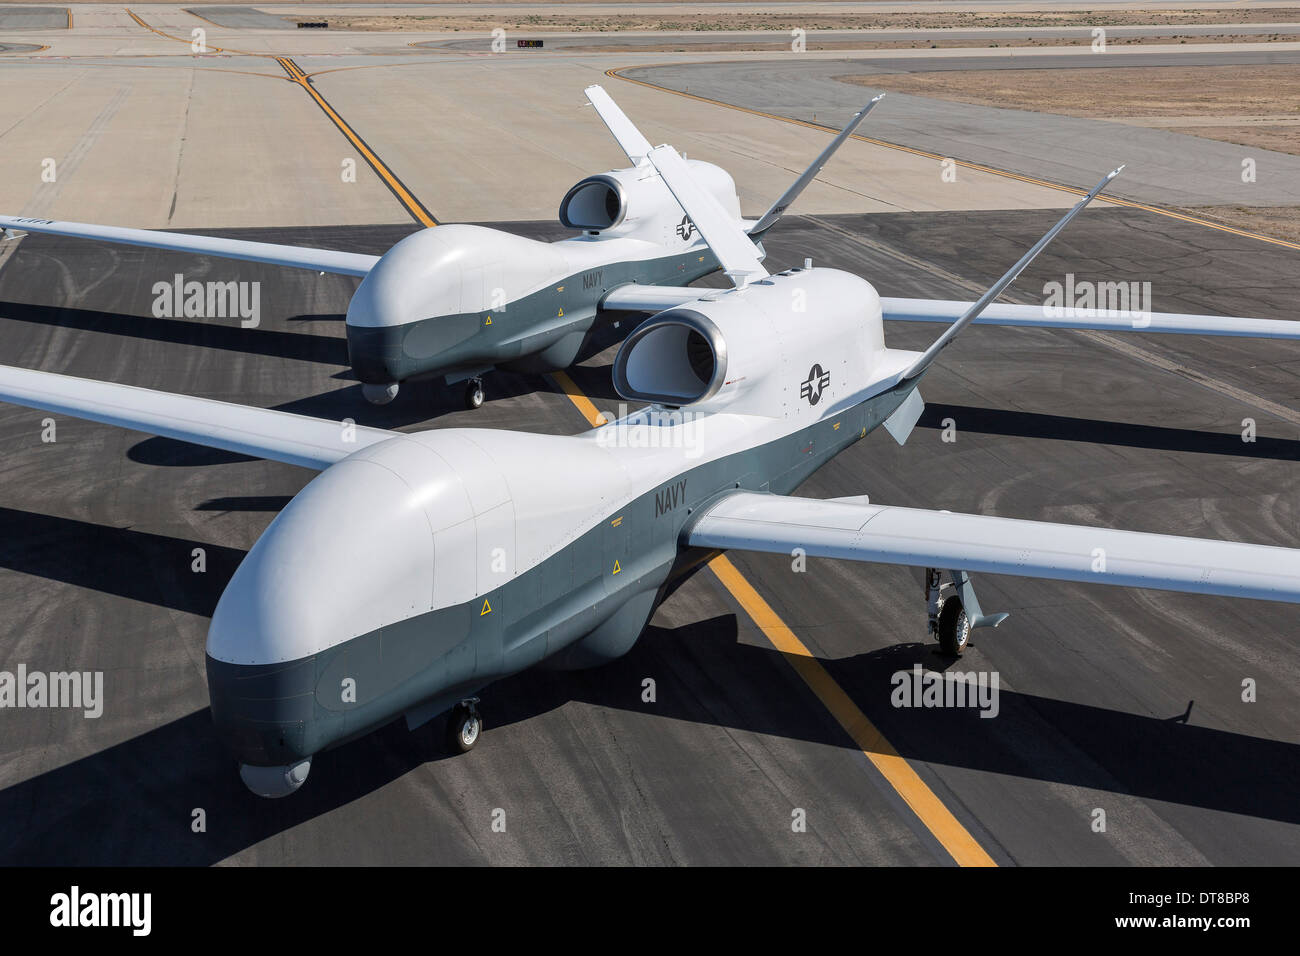 Two MQ-4C Triton unmanned aerial vehicles on the tarmac. Stock Photo